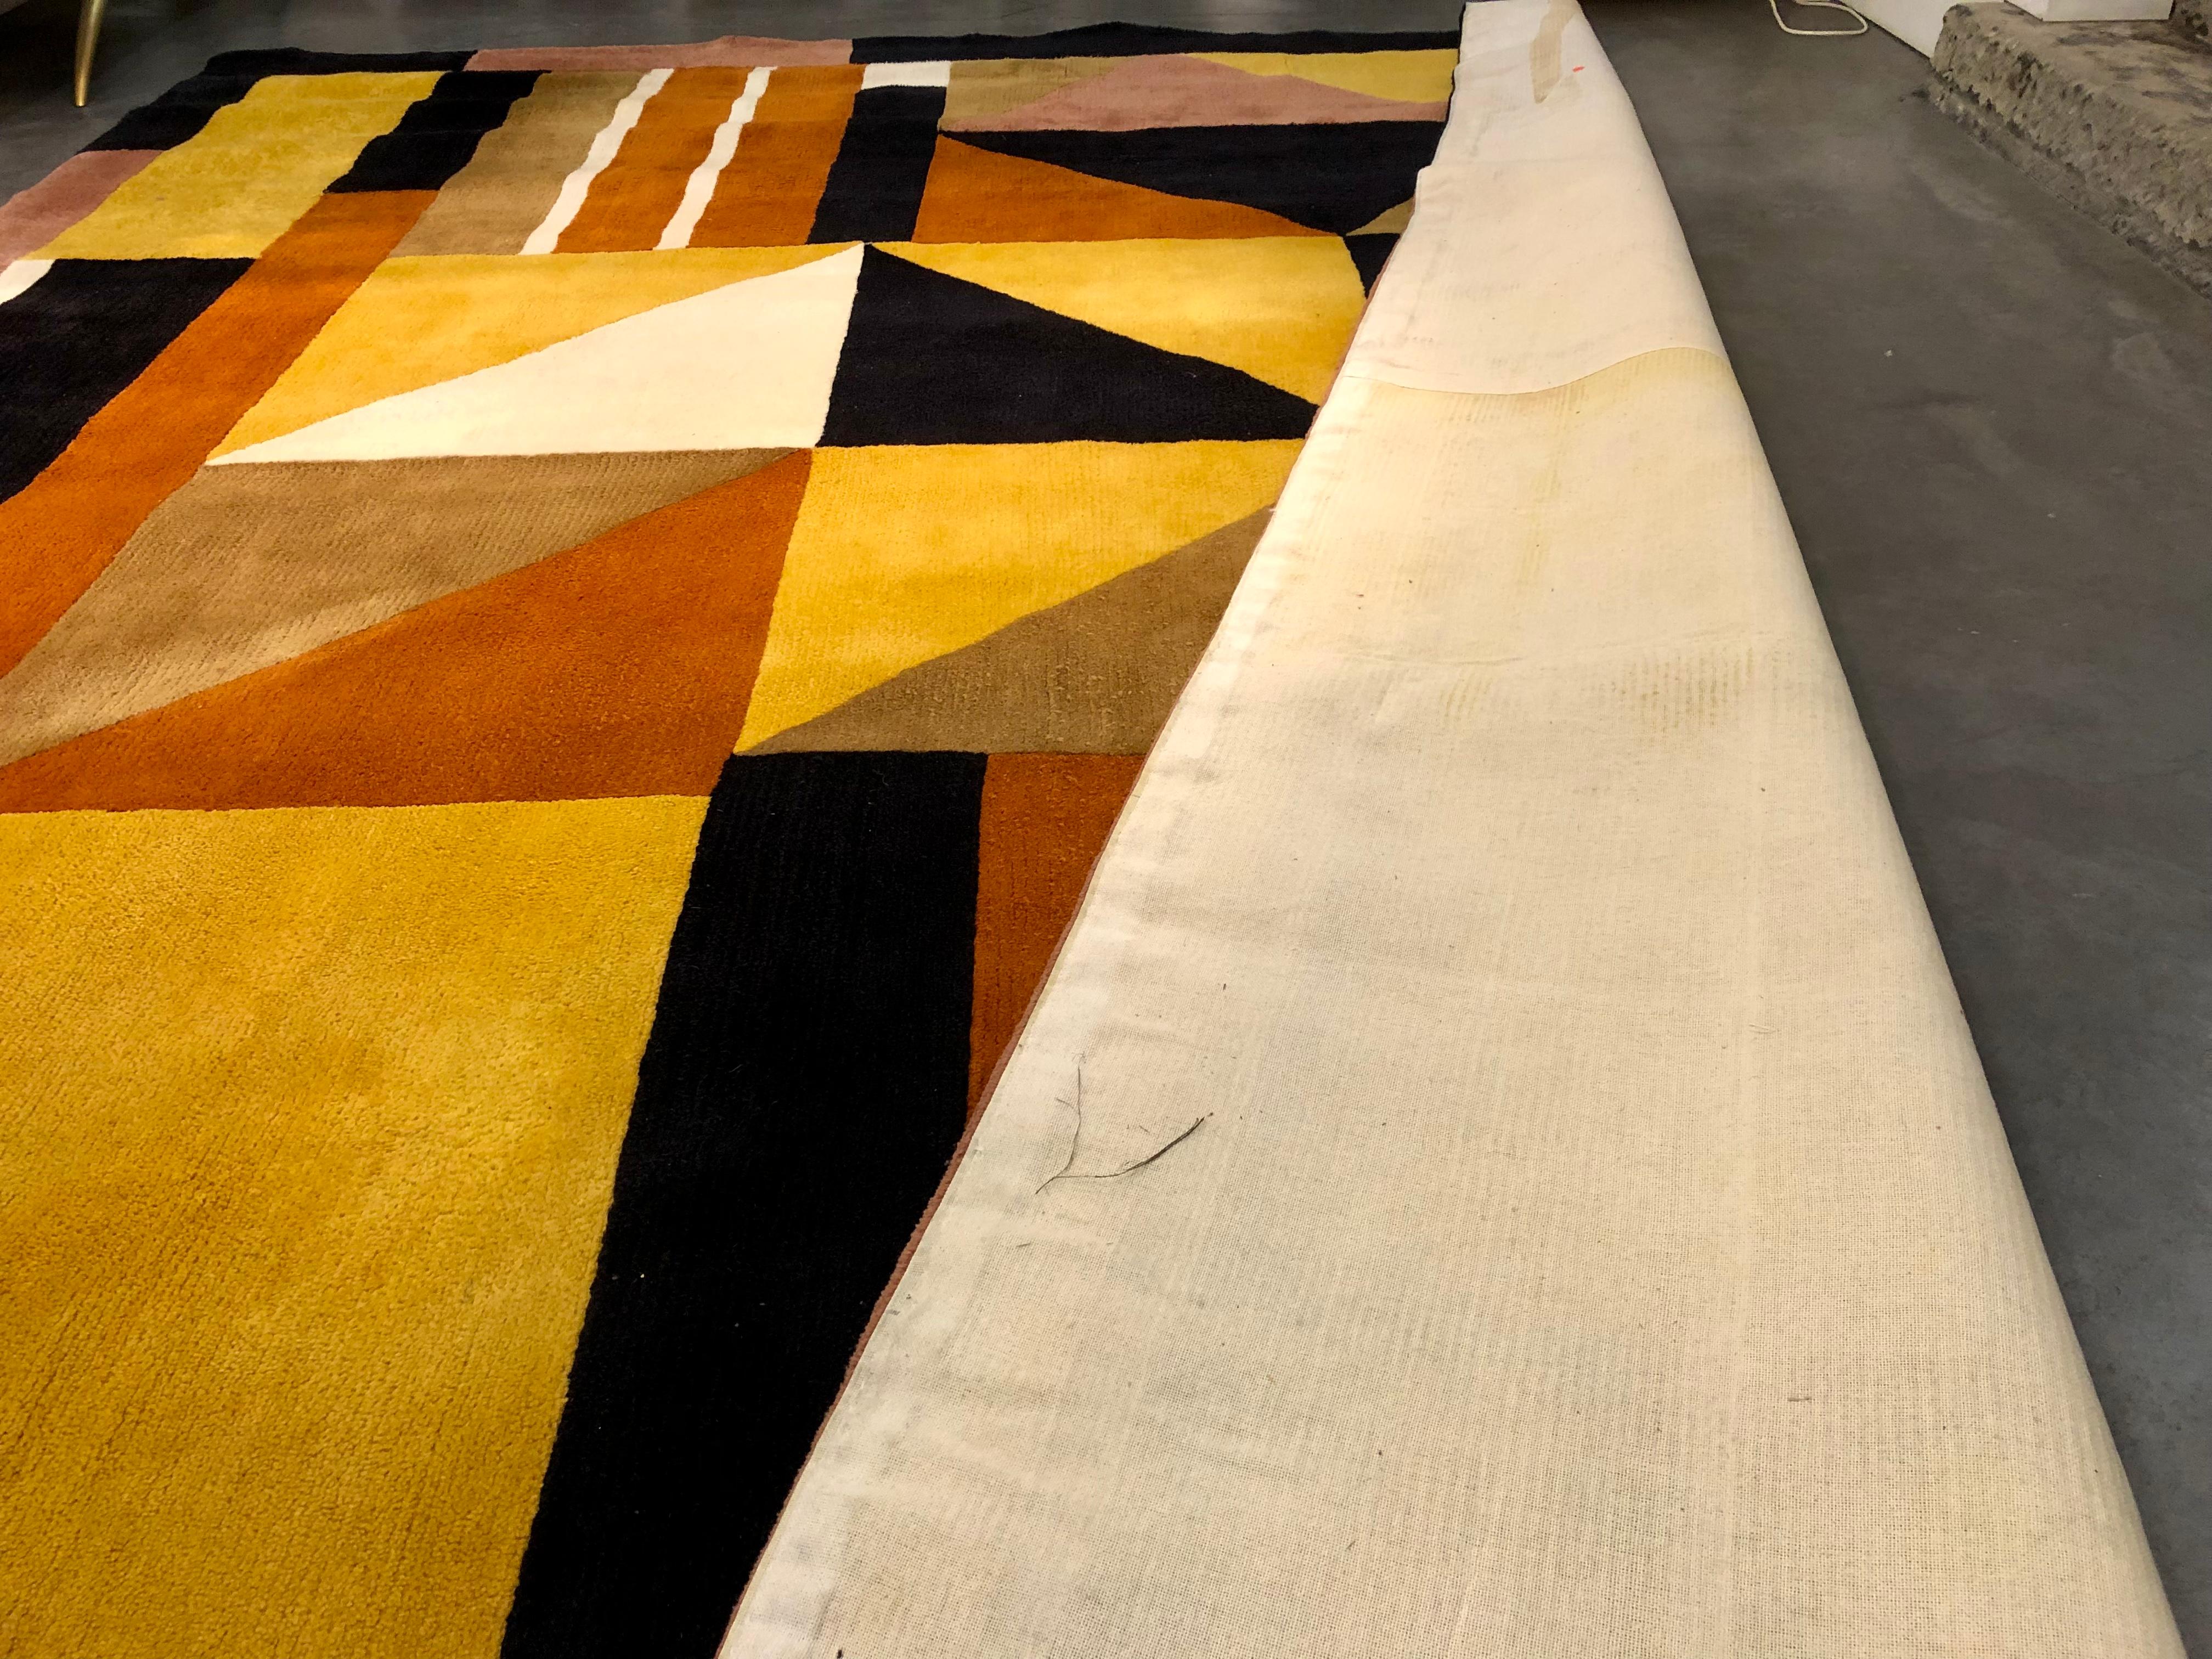 Rug Designed by Sonia Delaunay Edited by Artcurial in 10 Exemplars 1